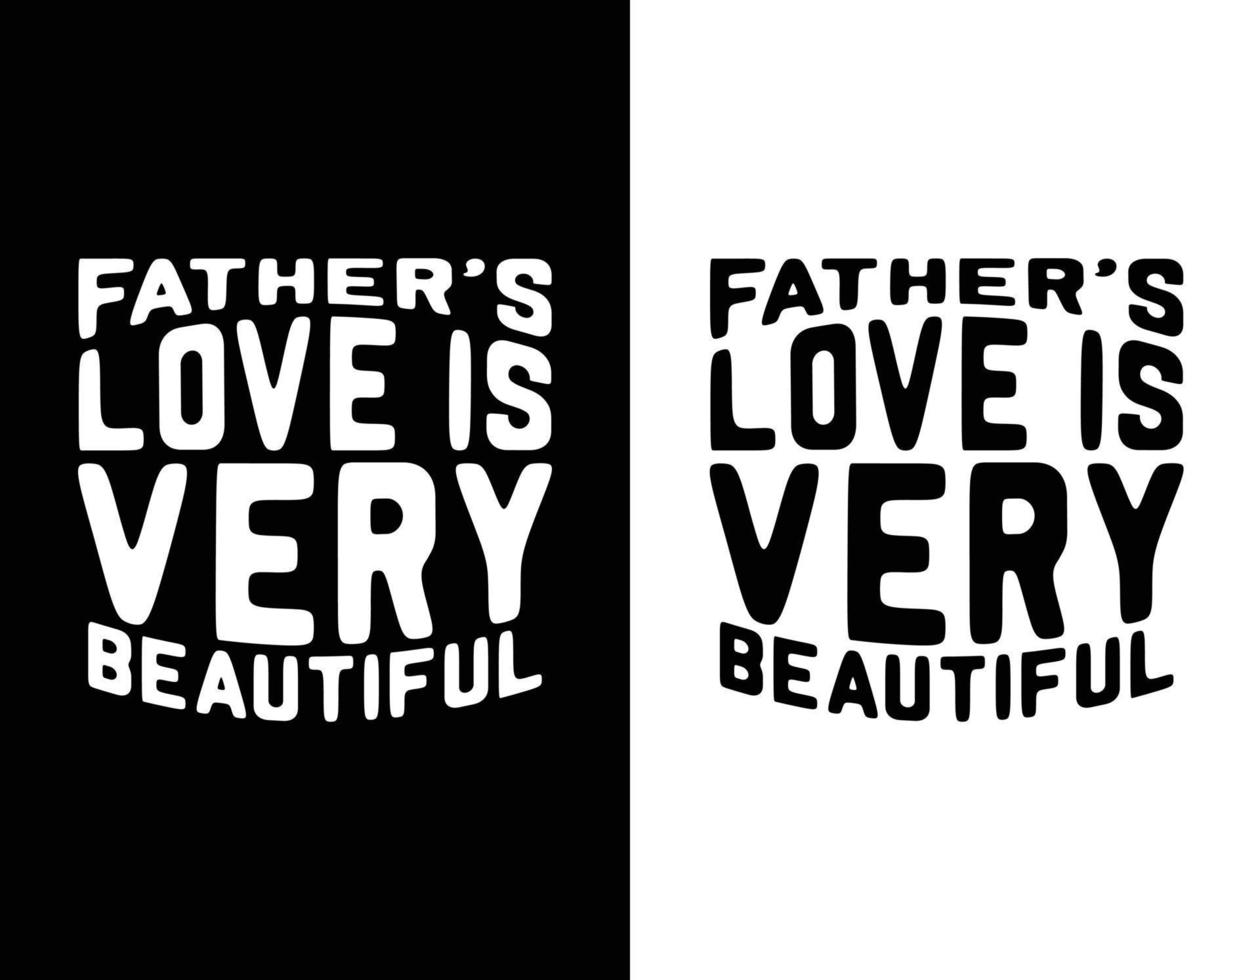 Father-s love typography t-shirt design vector